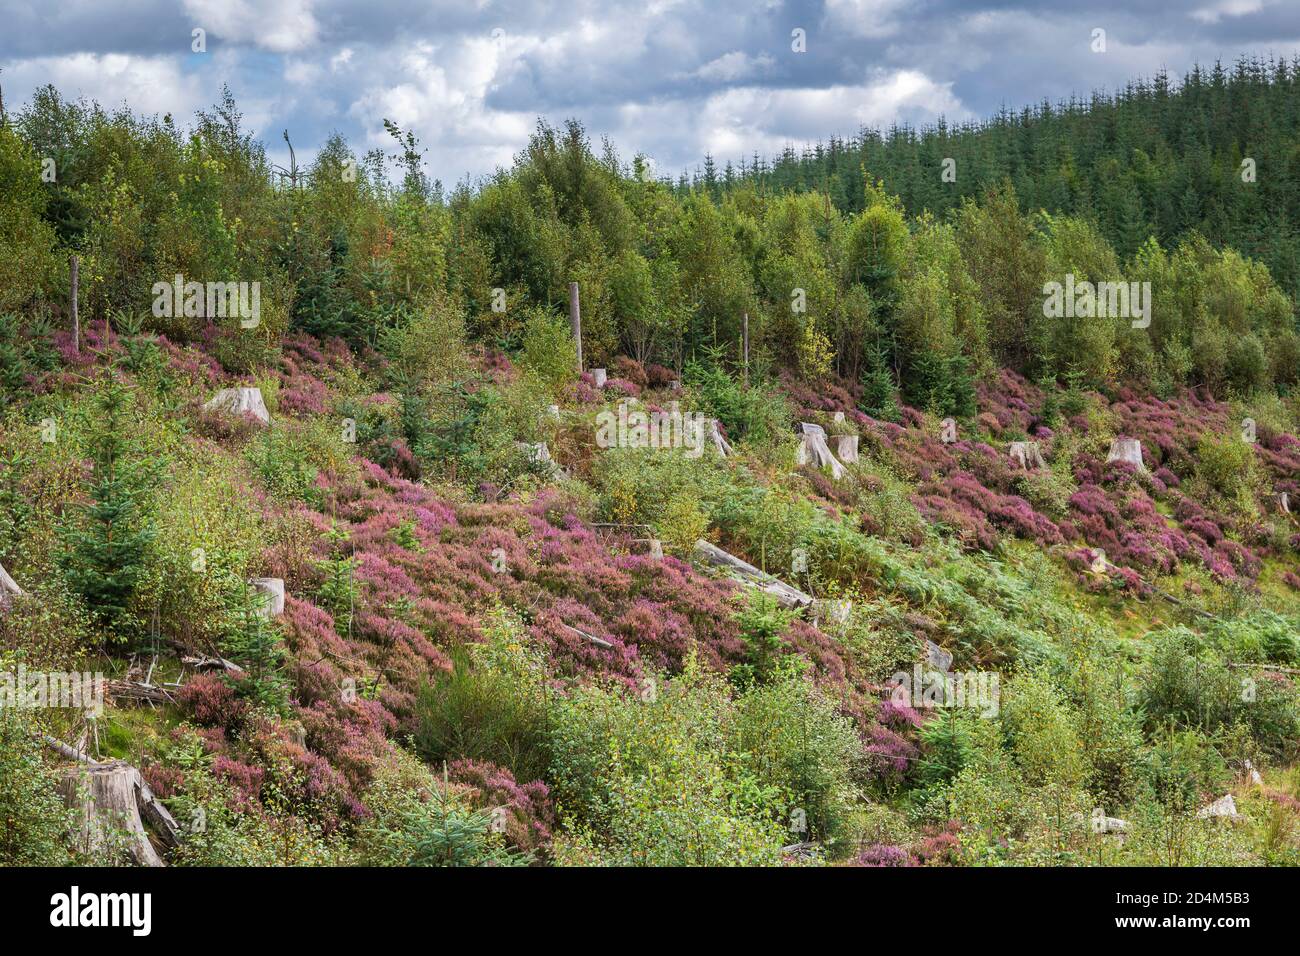 An autumnal landscape HDR image of Heather, Ling or Erica,covered ground in Kielder Forest in Northumberland, England. 09 September 2020 Stock Photo